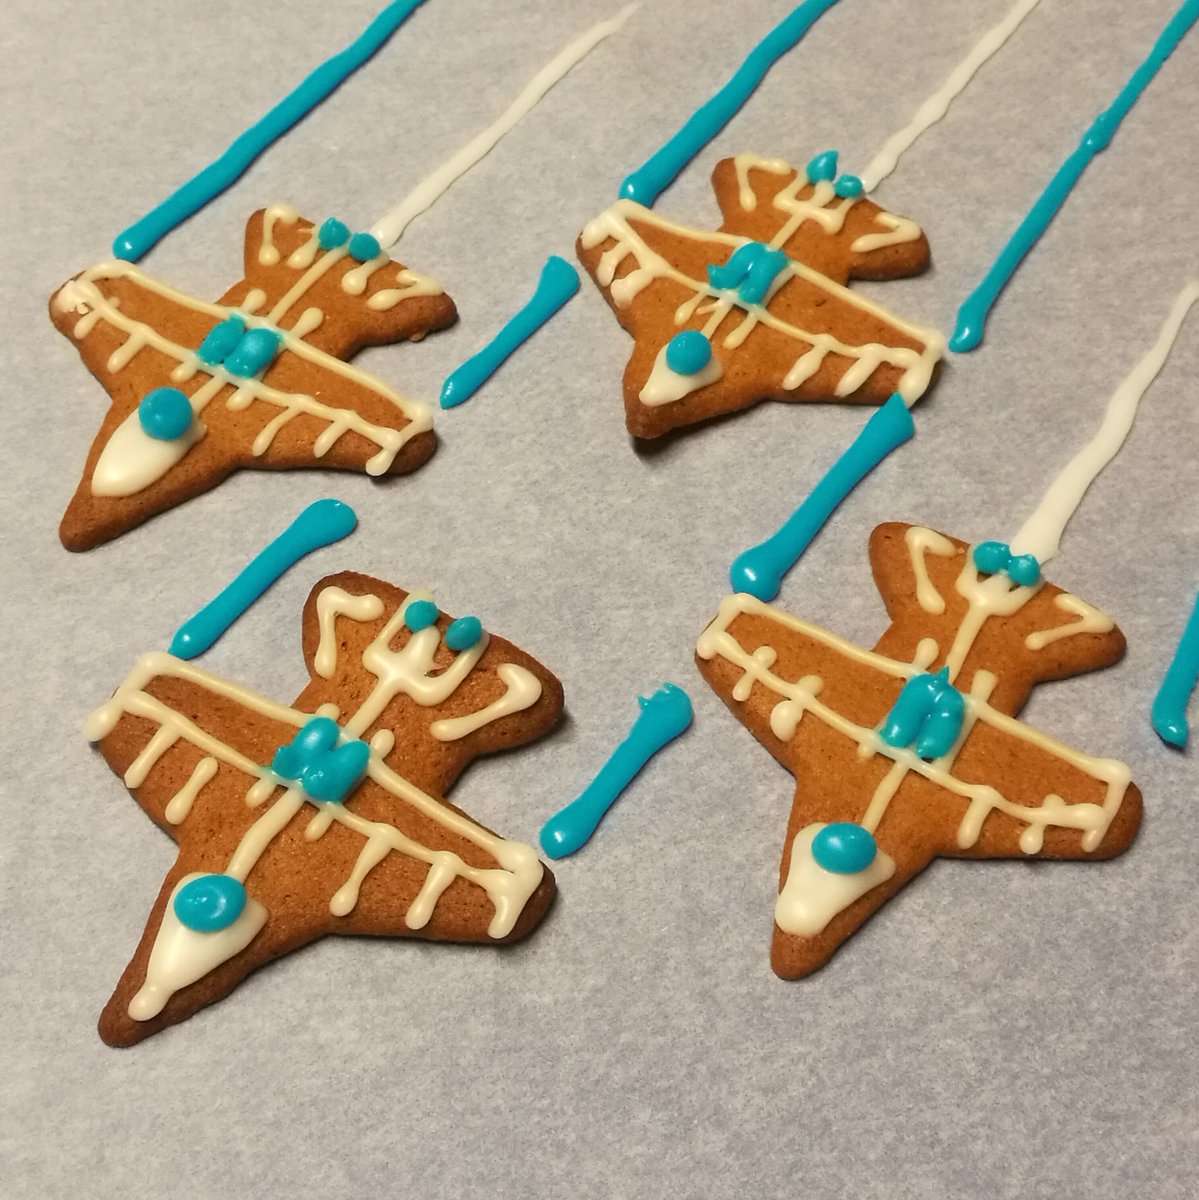 @securitysplat @BAES_Finland Nice one! It looks definitely as stylish as my first-ever gingerbread Hawks. 😄 These little fellows are trying to be @FinnishAirForce #MidnightHawks in a diamond formation. (Still waiting Santa Claus to give me a proper cookie cutter.)